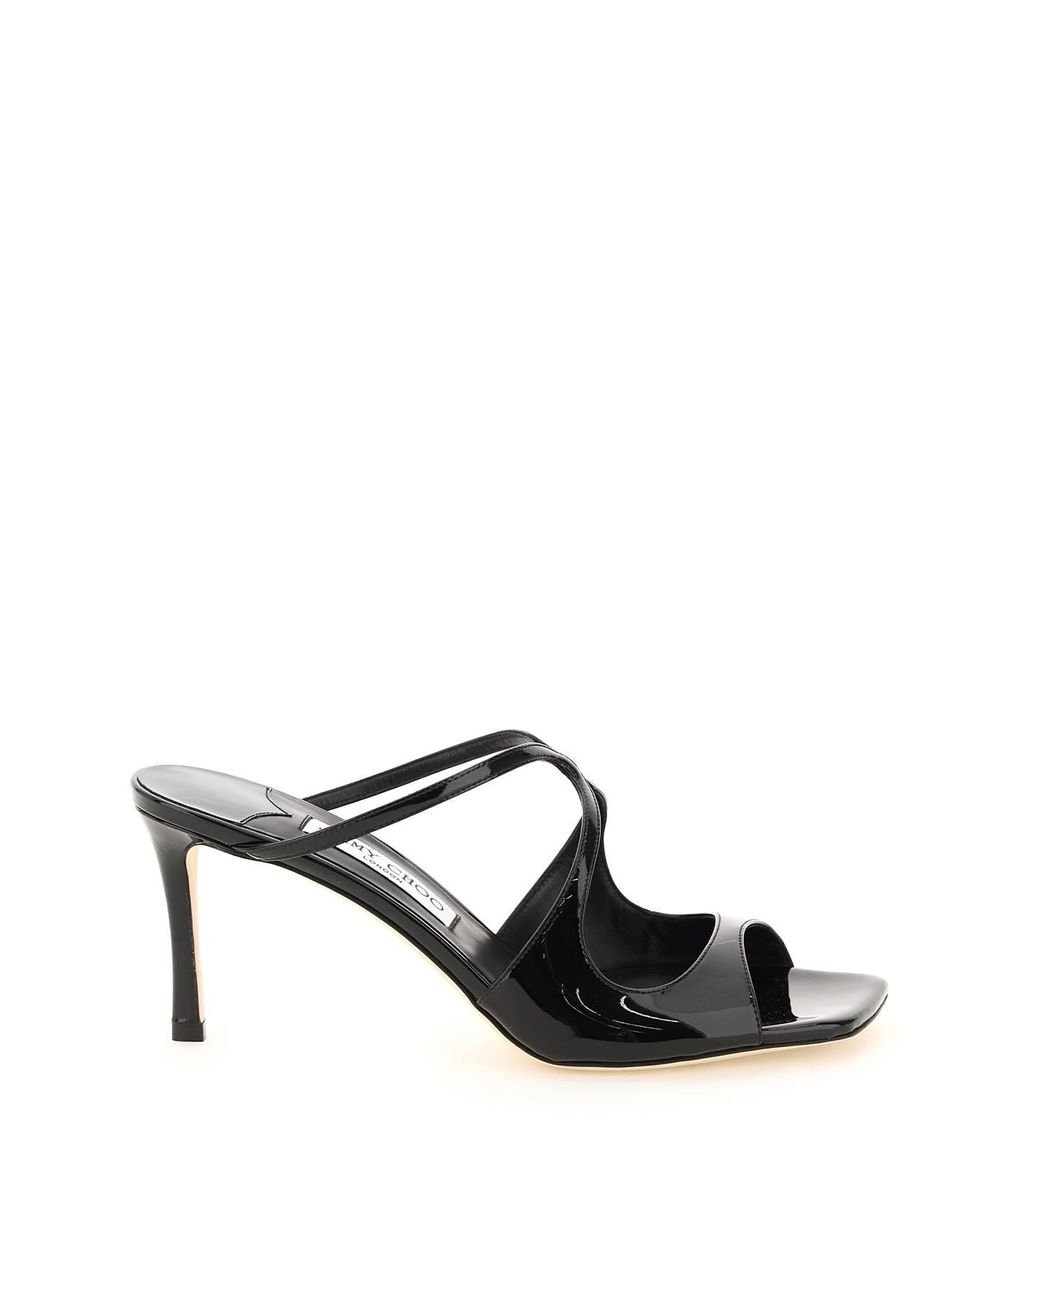 Jimmy Choo Patent Leather Anise 75 Sandals in Black | Lyst